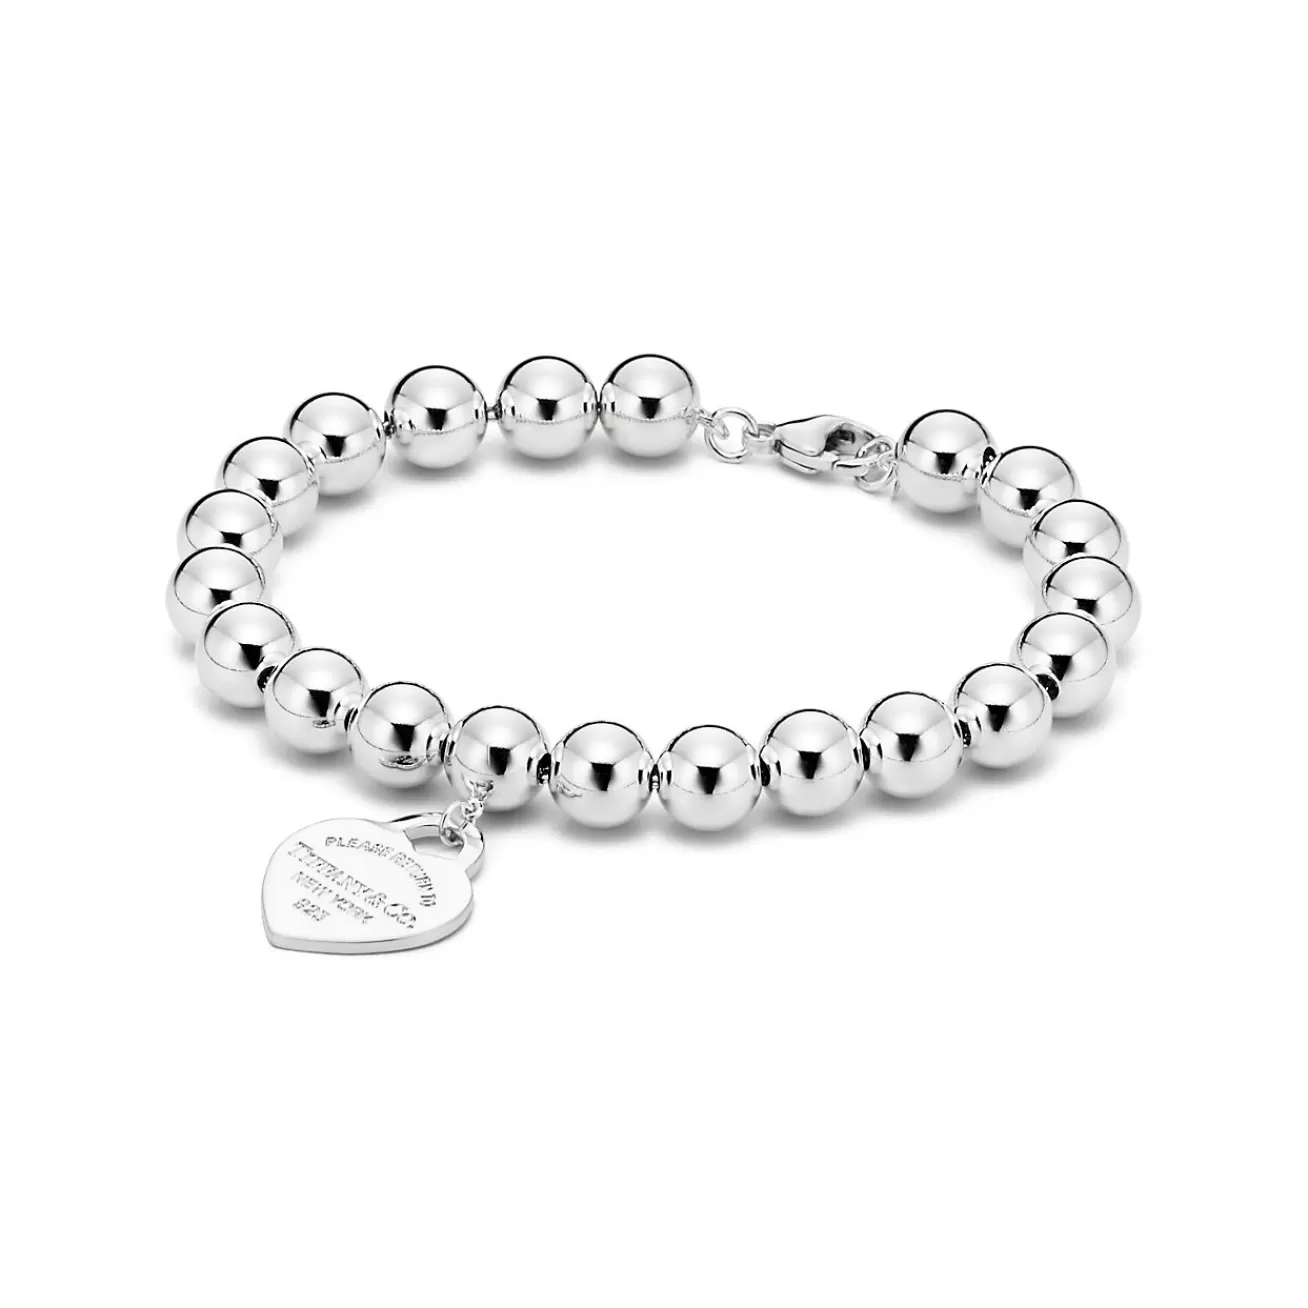 Tiffany & Co. Return to Tiffany® Heart Tag Bracelet in Silver, 8 mm | ^ Bracelets | Gifts for Her